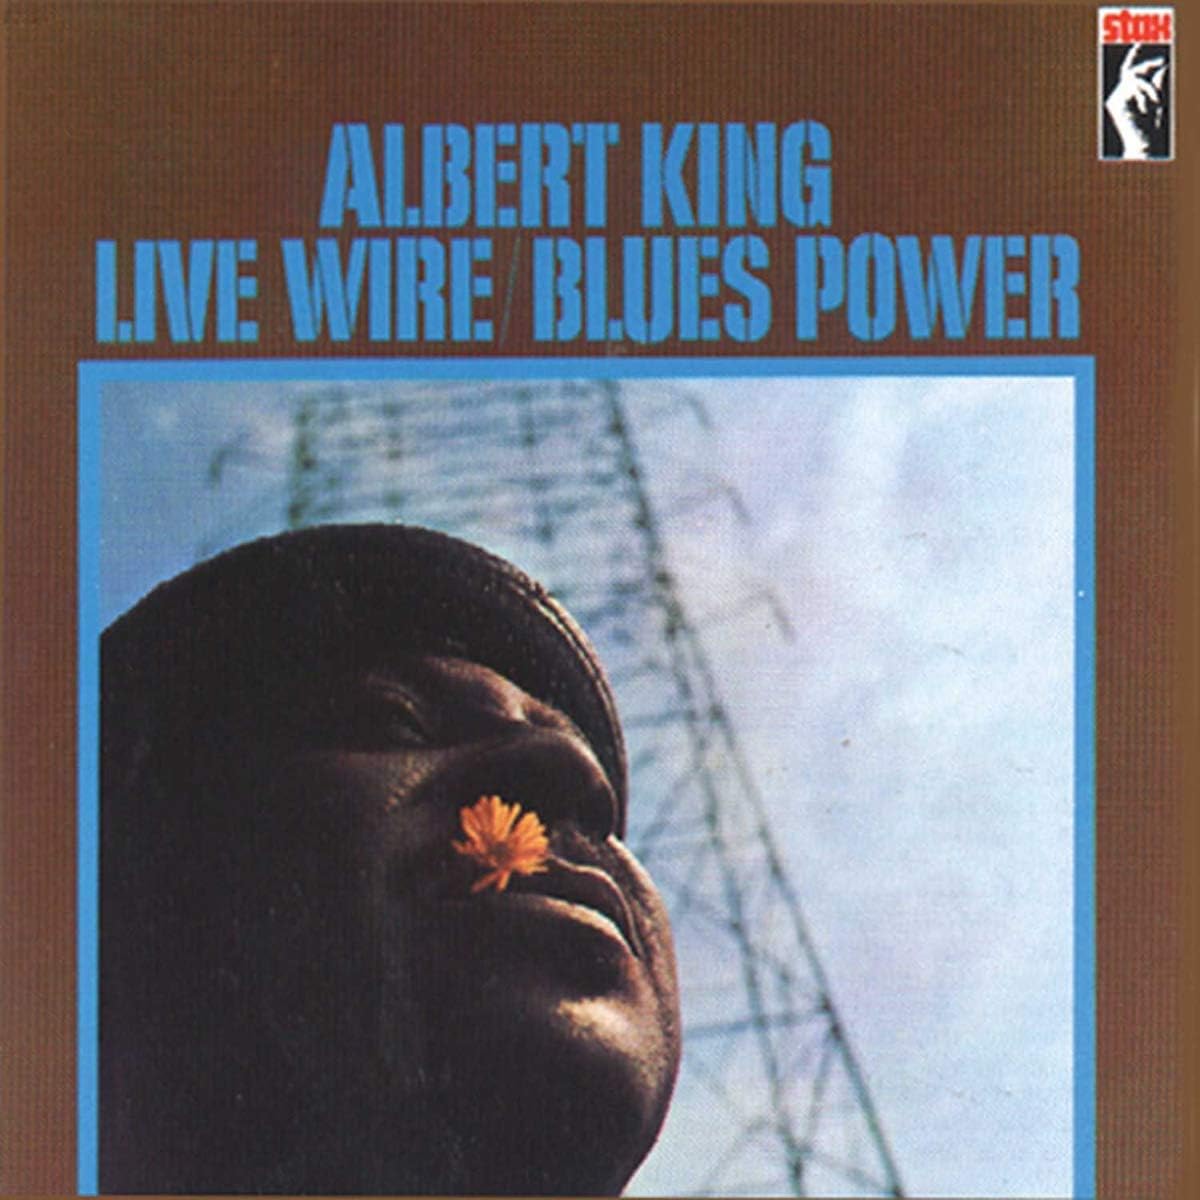 Albert King - Live Wire/Blues Power, 1968 In 1968, King was performing at Ike Turner's Manhattan Club in East St. Louis when promoter Bill Graham offered him $1,600 to play three nights at The Fillmore Auditorium in San Francisco. He released the album Live Wire/Blues Power.